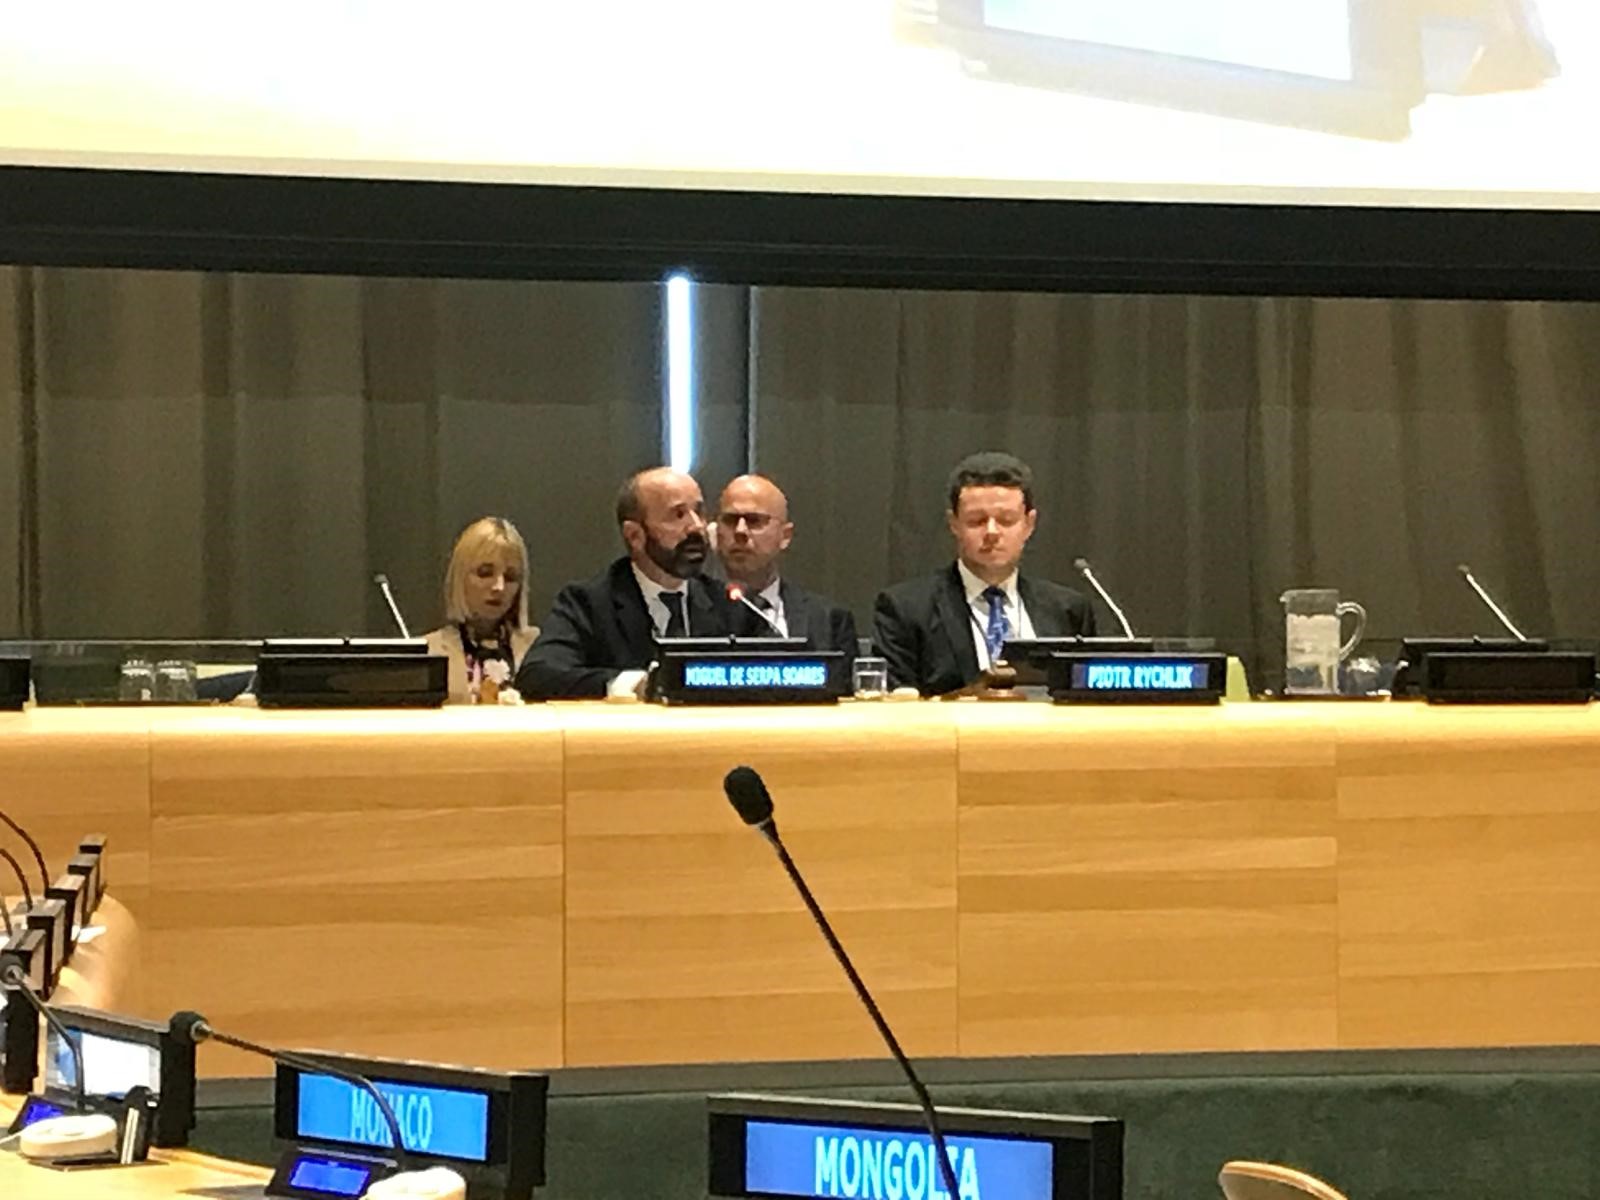 Mr. Miguel de Serpa Soares, Under-Secretary-General for Legal Affairs at the International Law Week and 29th Informal Meeting of Legal Advisers